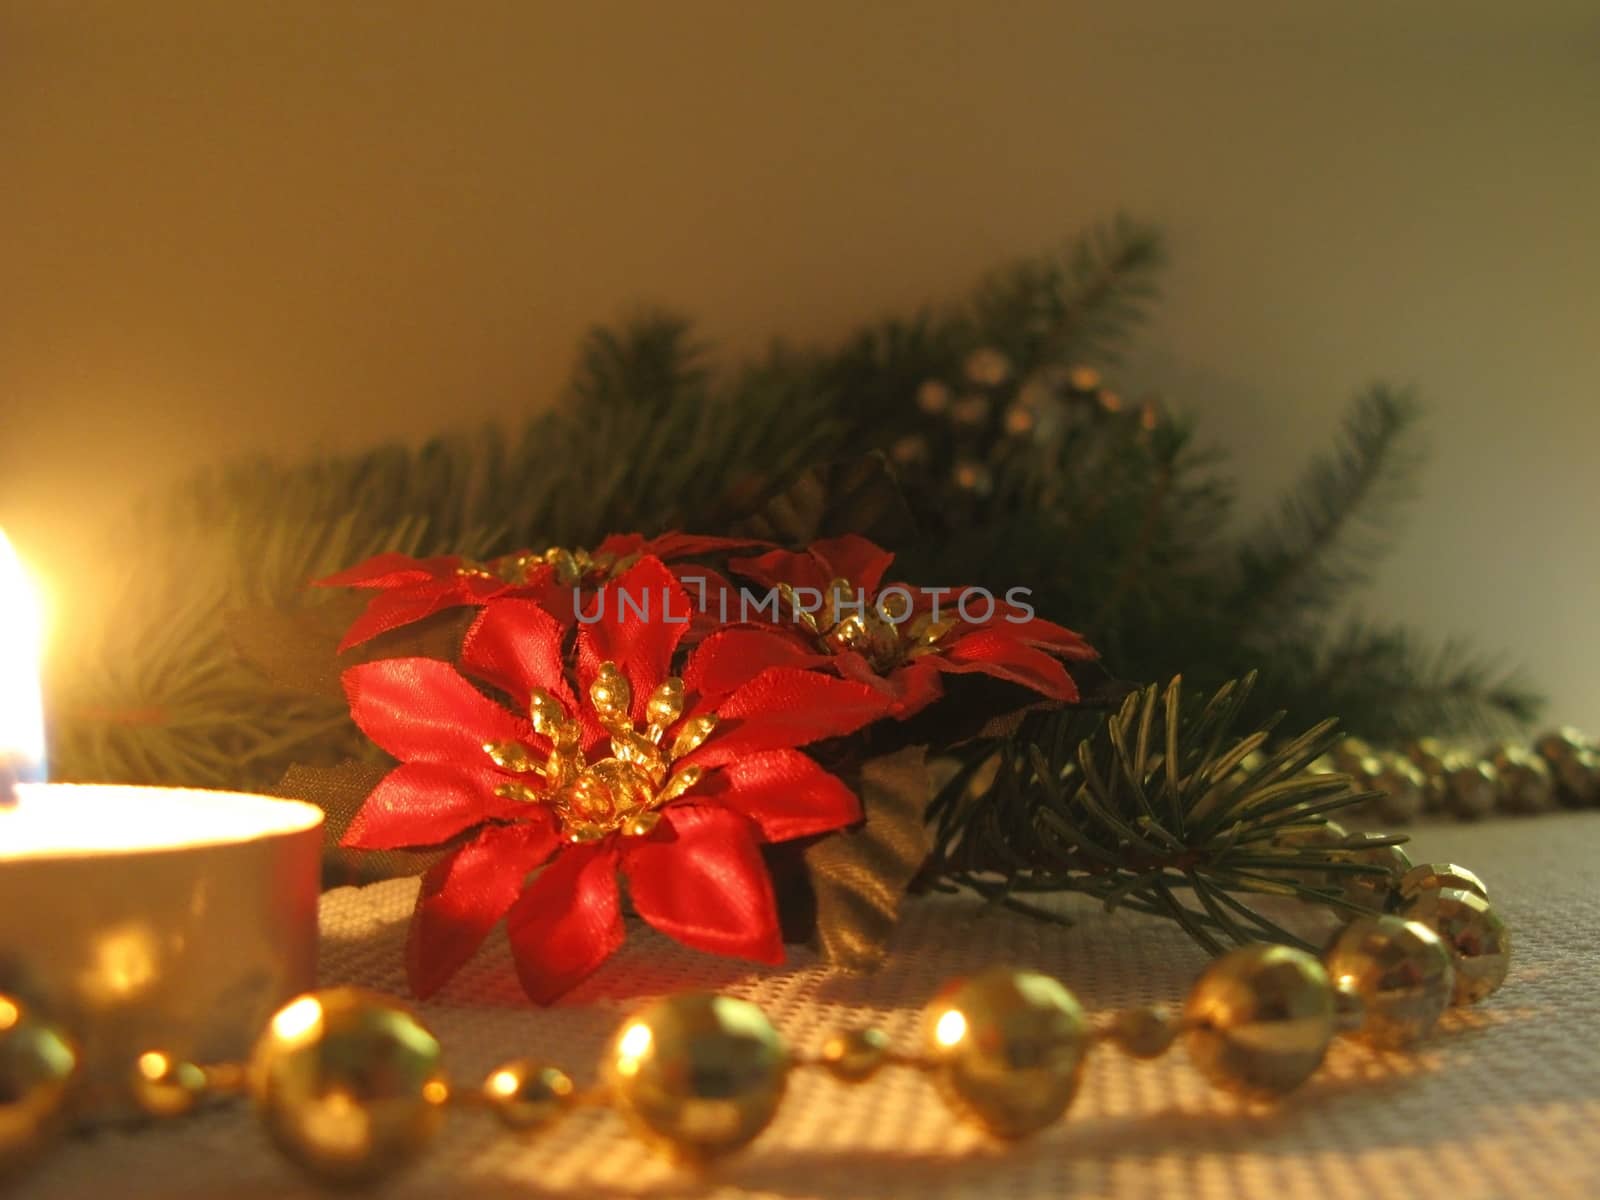 In images Christmas Decoration Over Wooden Background. Decorations over Wood. Vintage